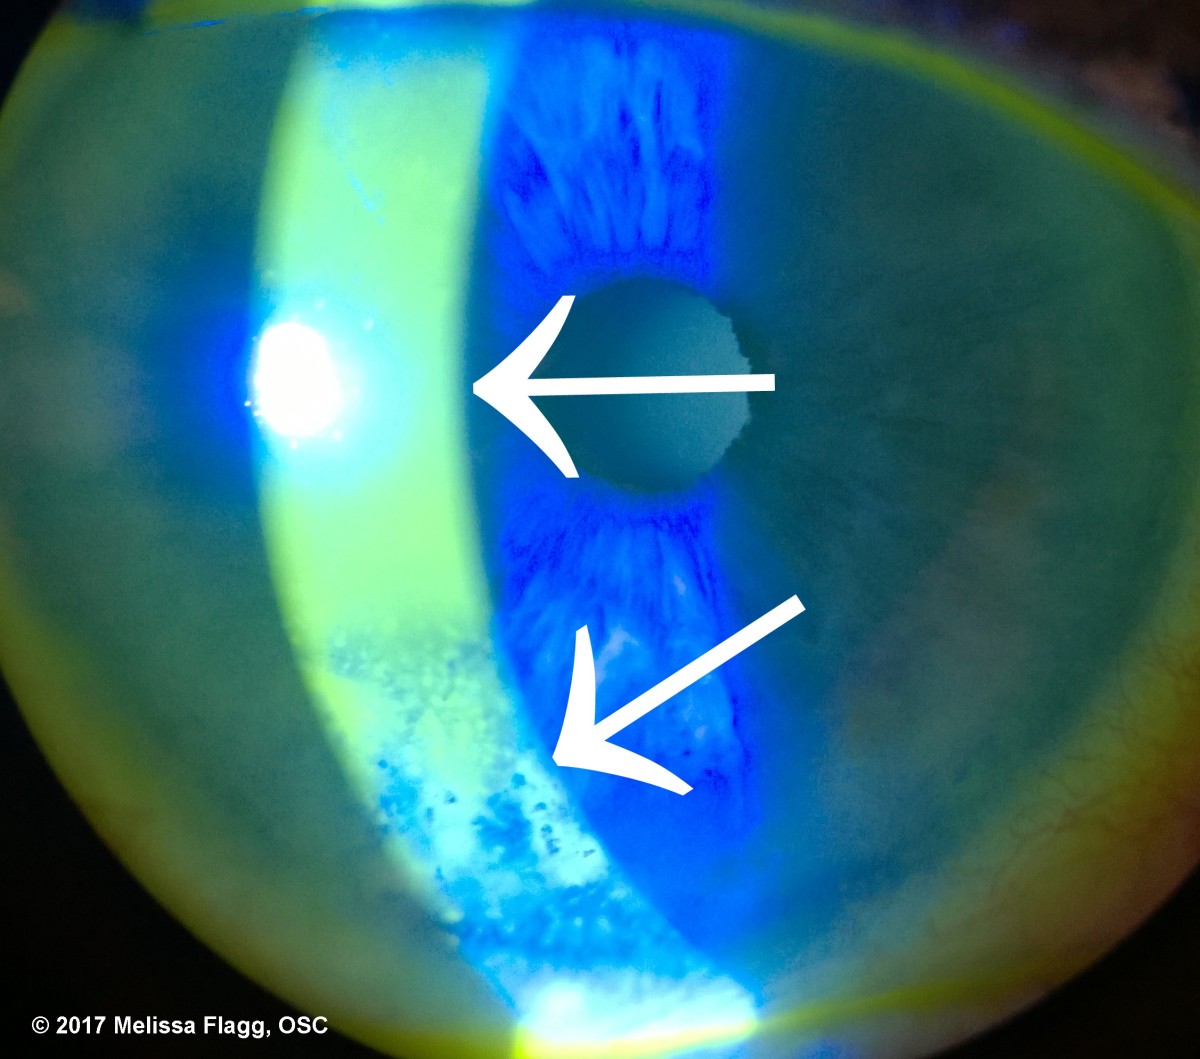 An eye stained with fluorescein. The top arrows point to what the tear film should look like when stained. The bottom arrow points to the disrupted tear film caused by dryness.